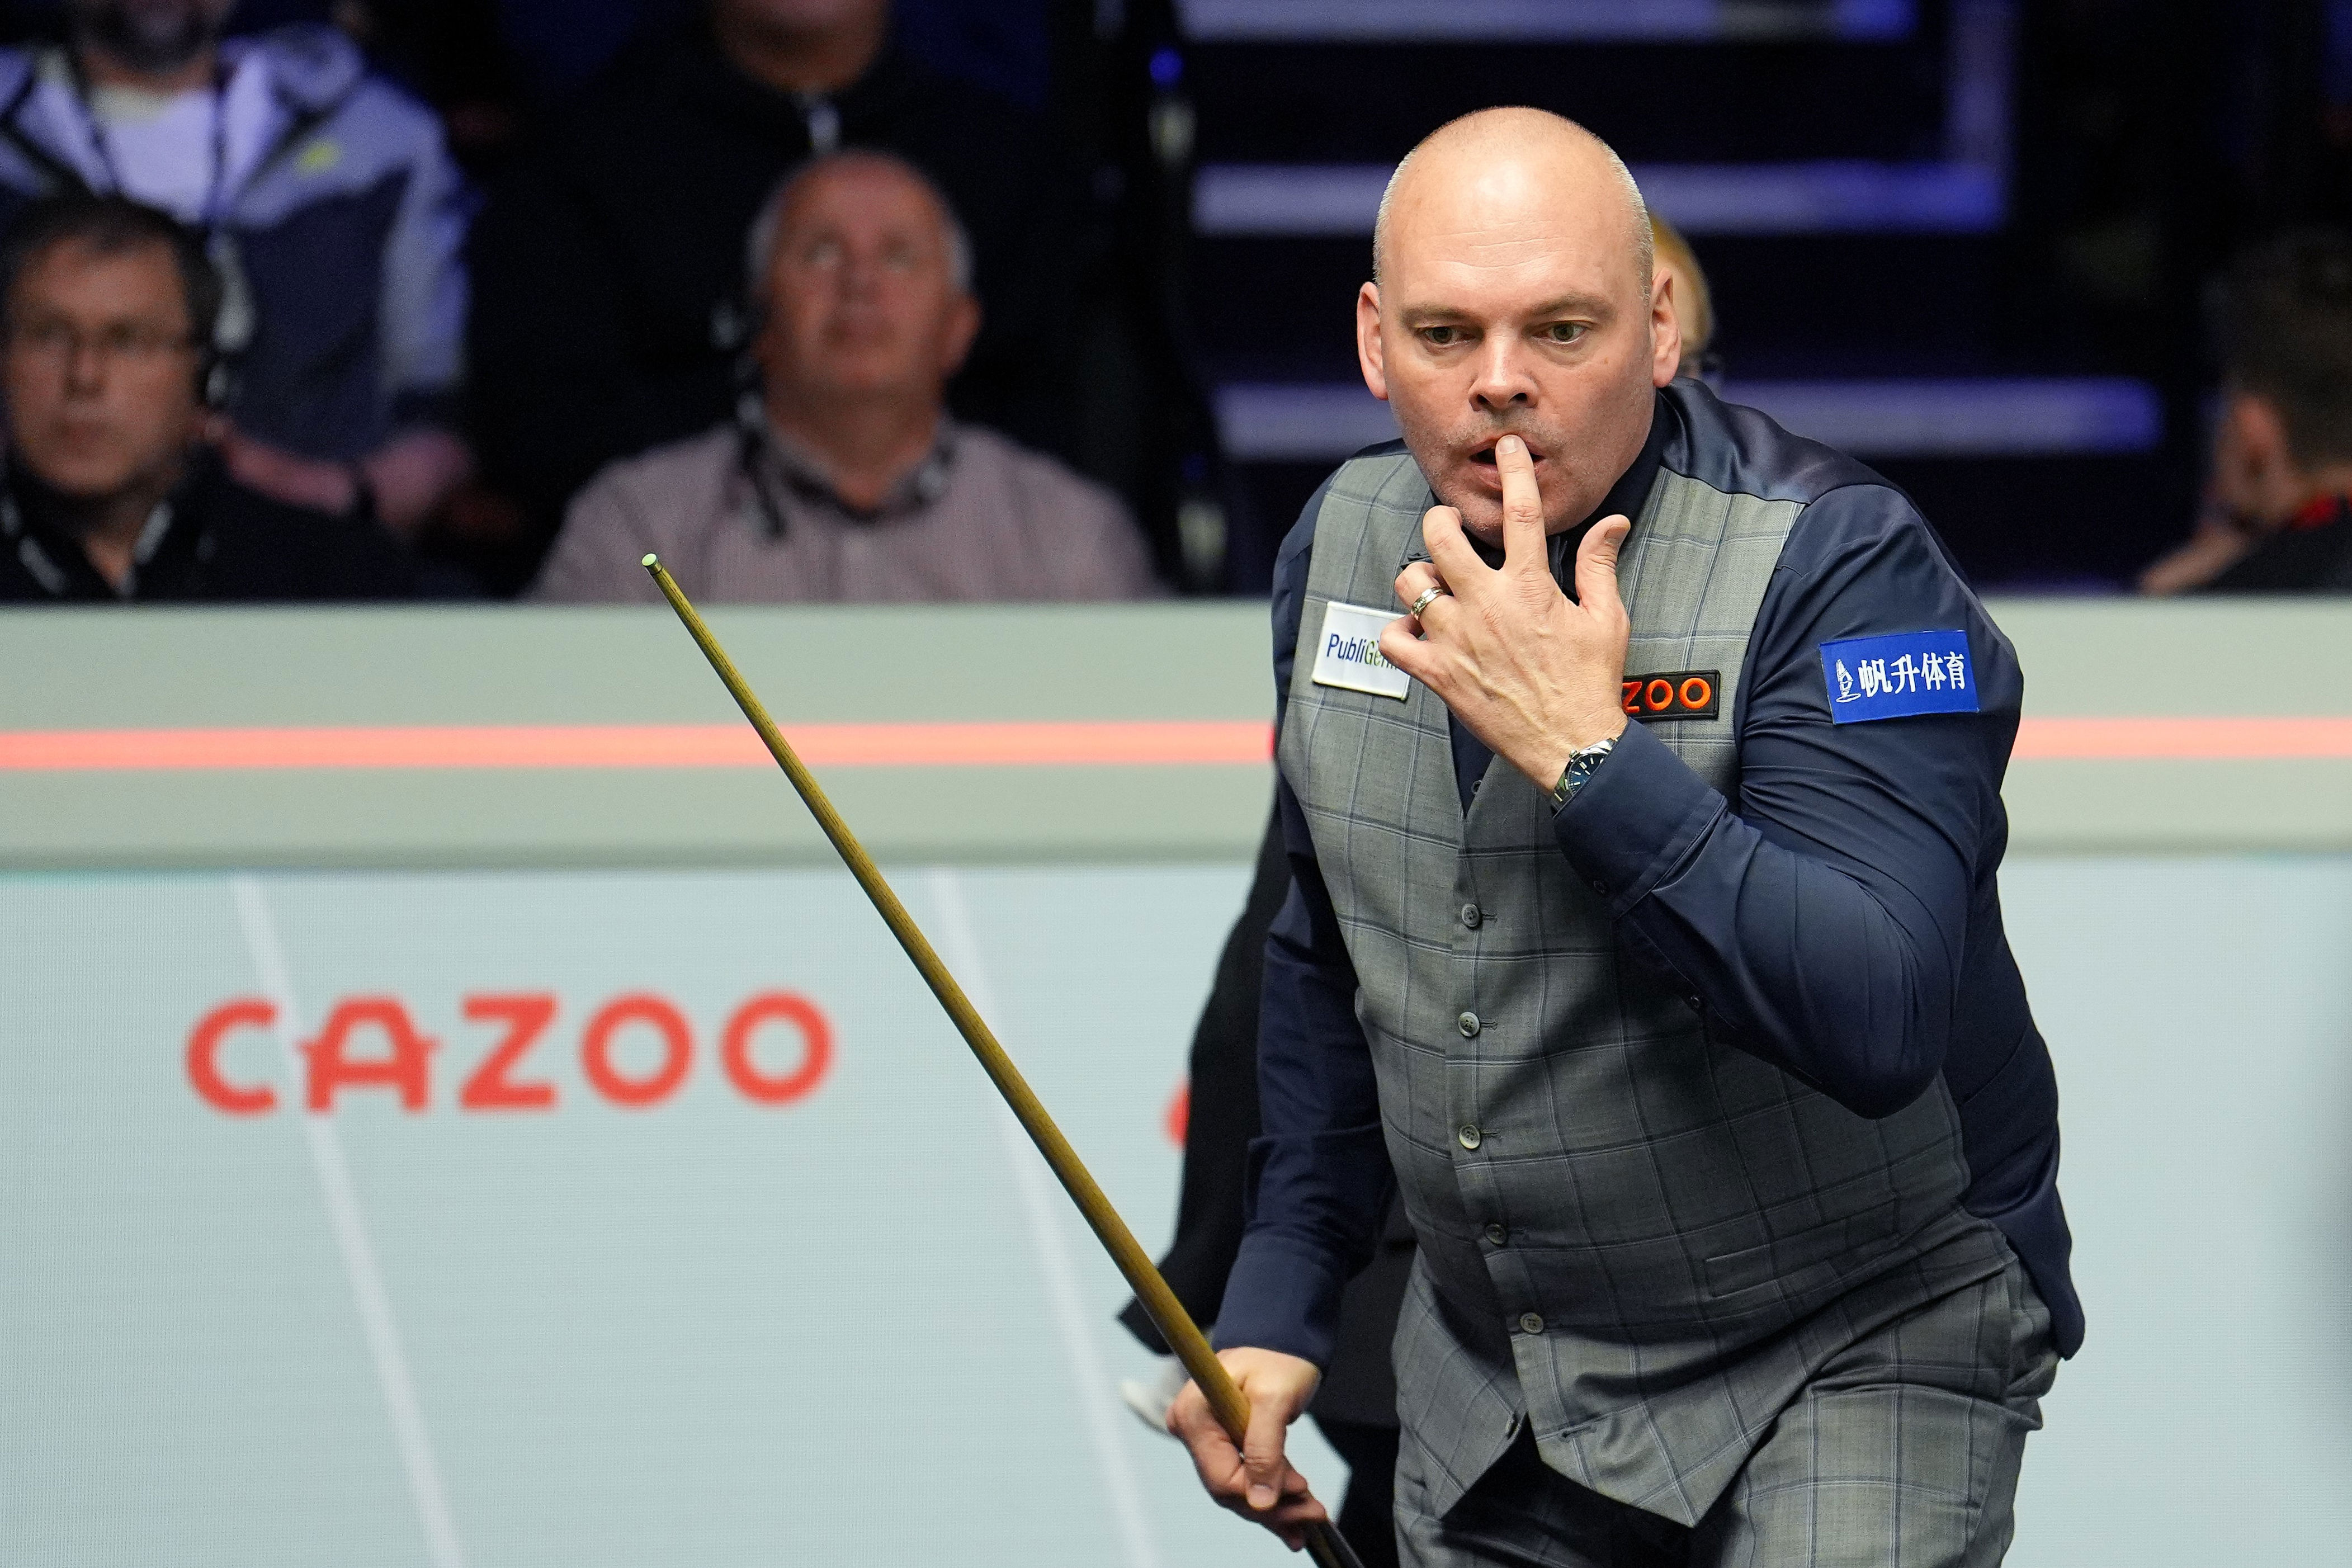 world snooker championship live: scores and updates as trump and o’sullivan in quarter-final action